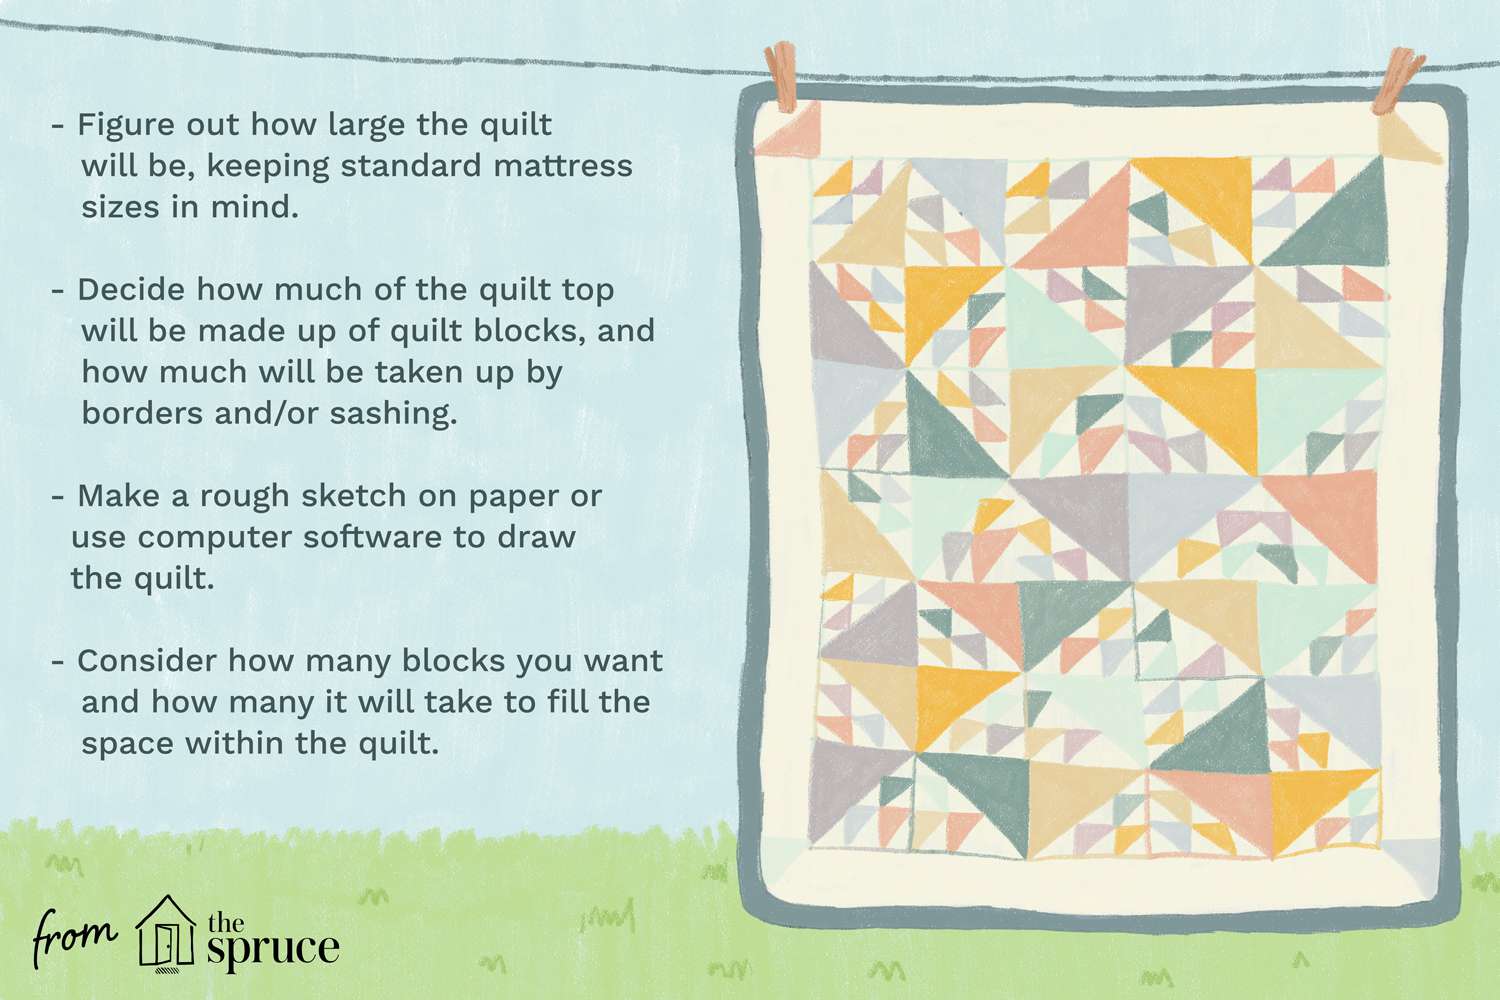 How Many Different Fabrics Should You Use In A Quilt?